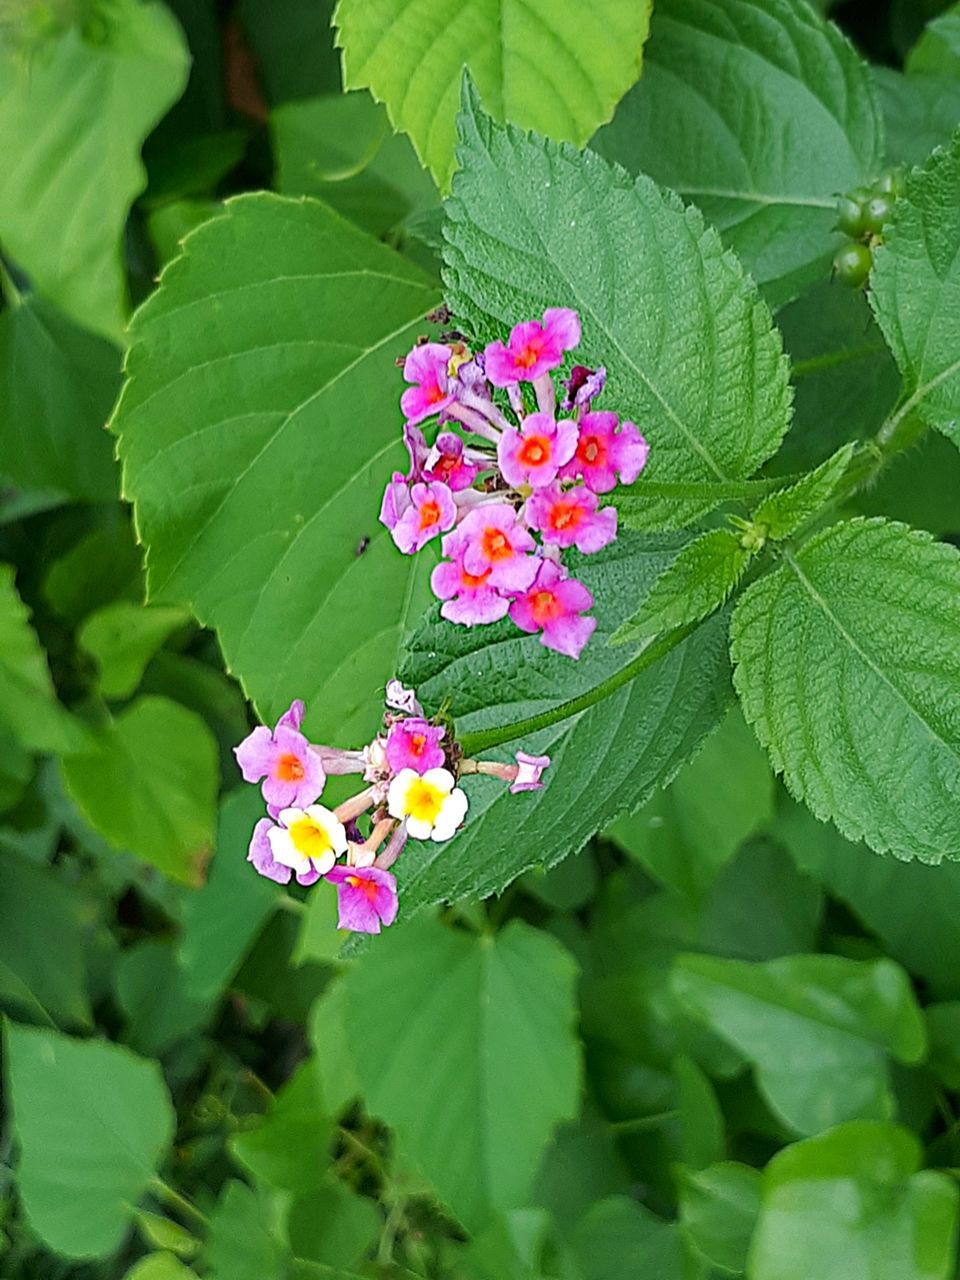 flowering plant, flower, leaf, plant part, plant, fragility, vulnerability, lantana, beauty in nature, freshness, petal, growth, inflorescence, close-up, flower head, nature, green color, pink color, day, focus on foreground, no people, outdoors